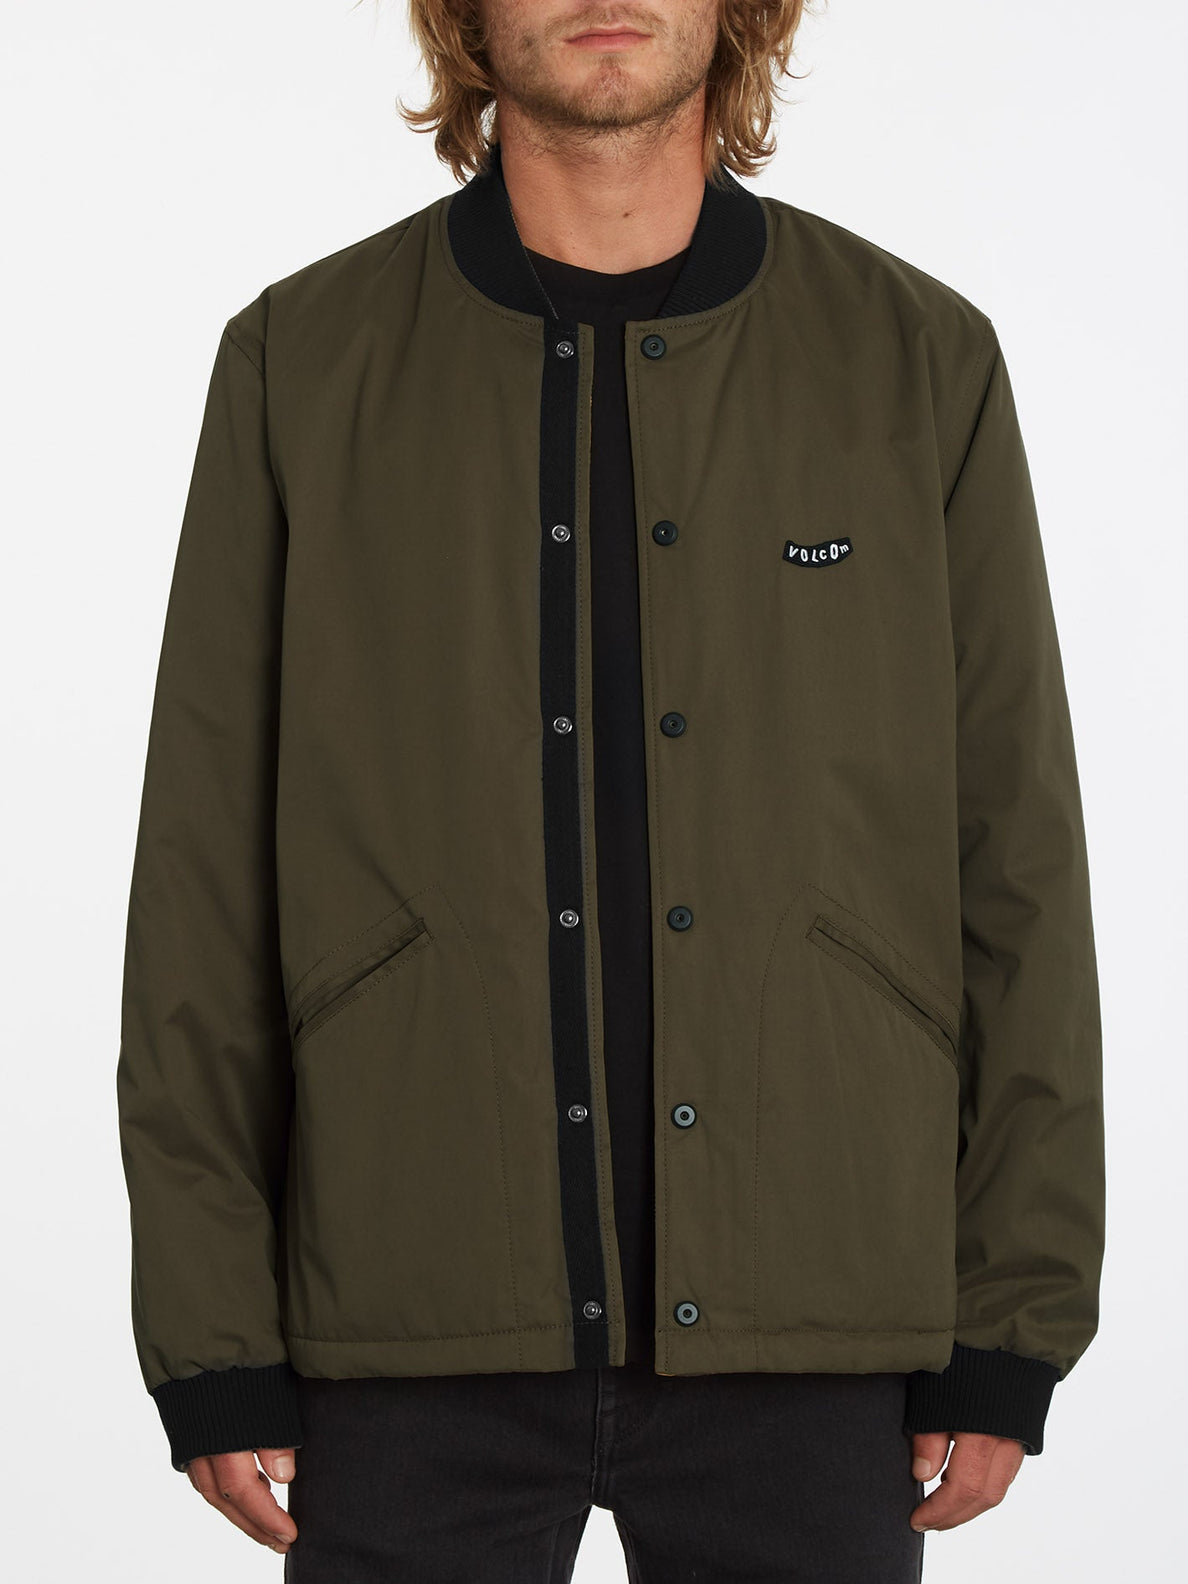 Lookster Jacket (Reversible) - SERVICE GREEN (A1632007_SVG) [2]